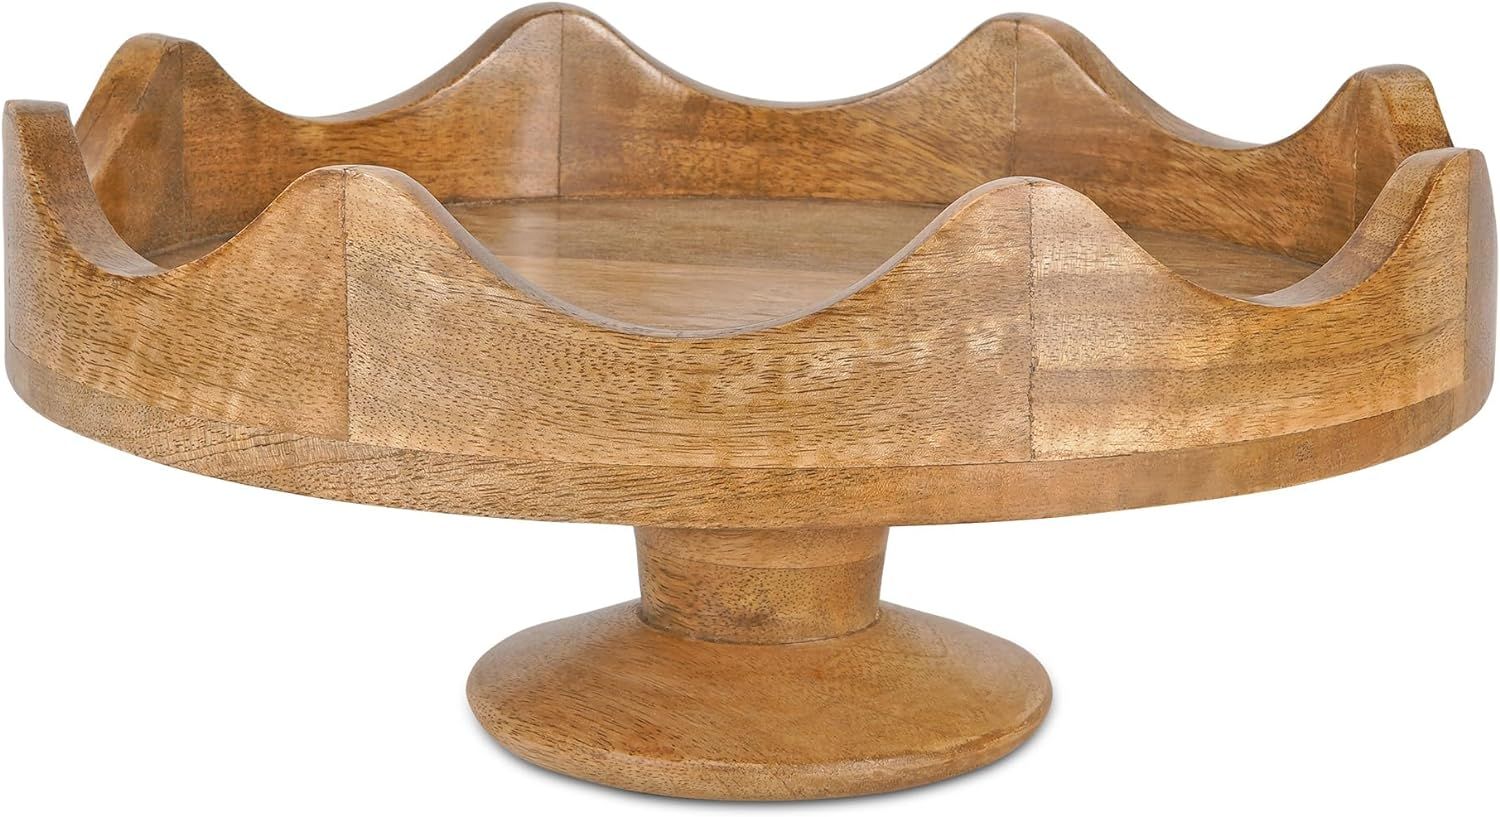 “Scallop” Footed Wooden Fruit Bowl (Mangowood, Natural) - Handcrafted Coffee Table Decor - Ov... | Amazon (US)